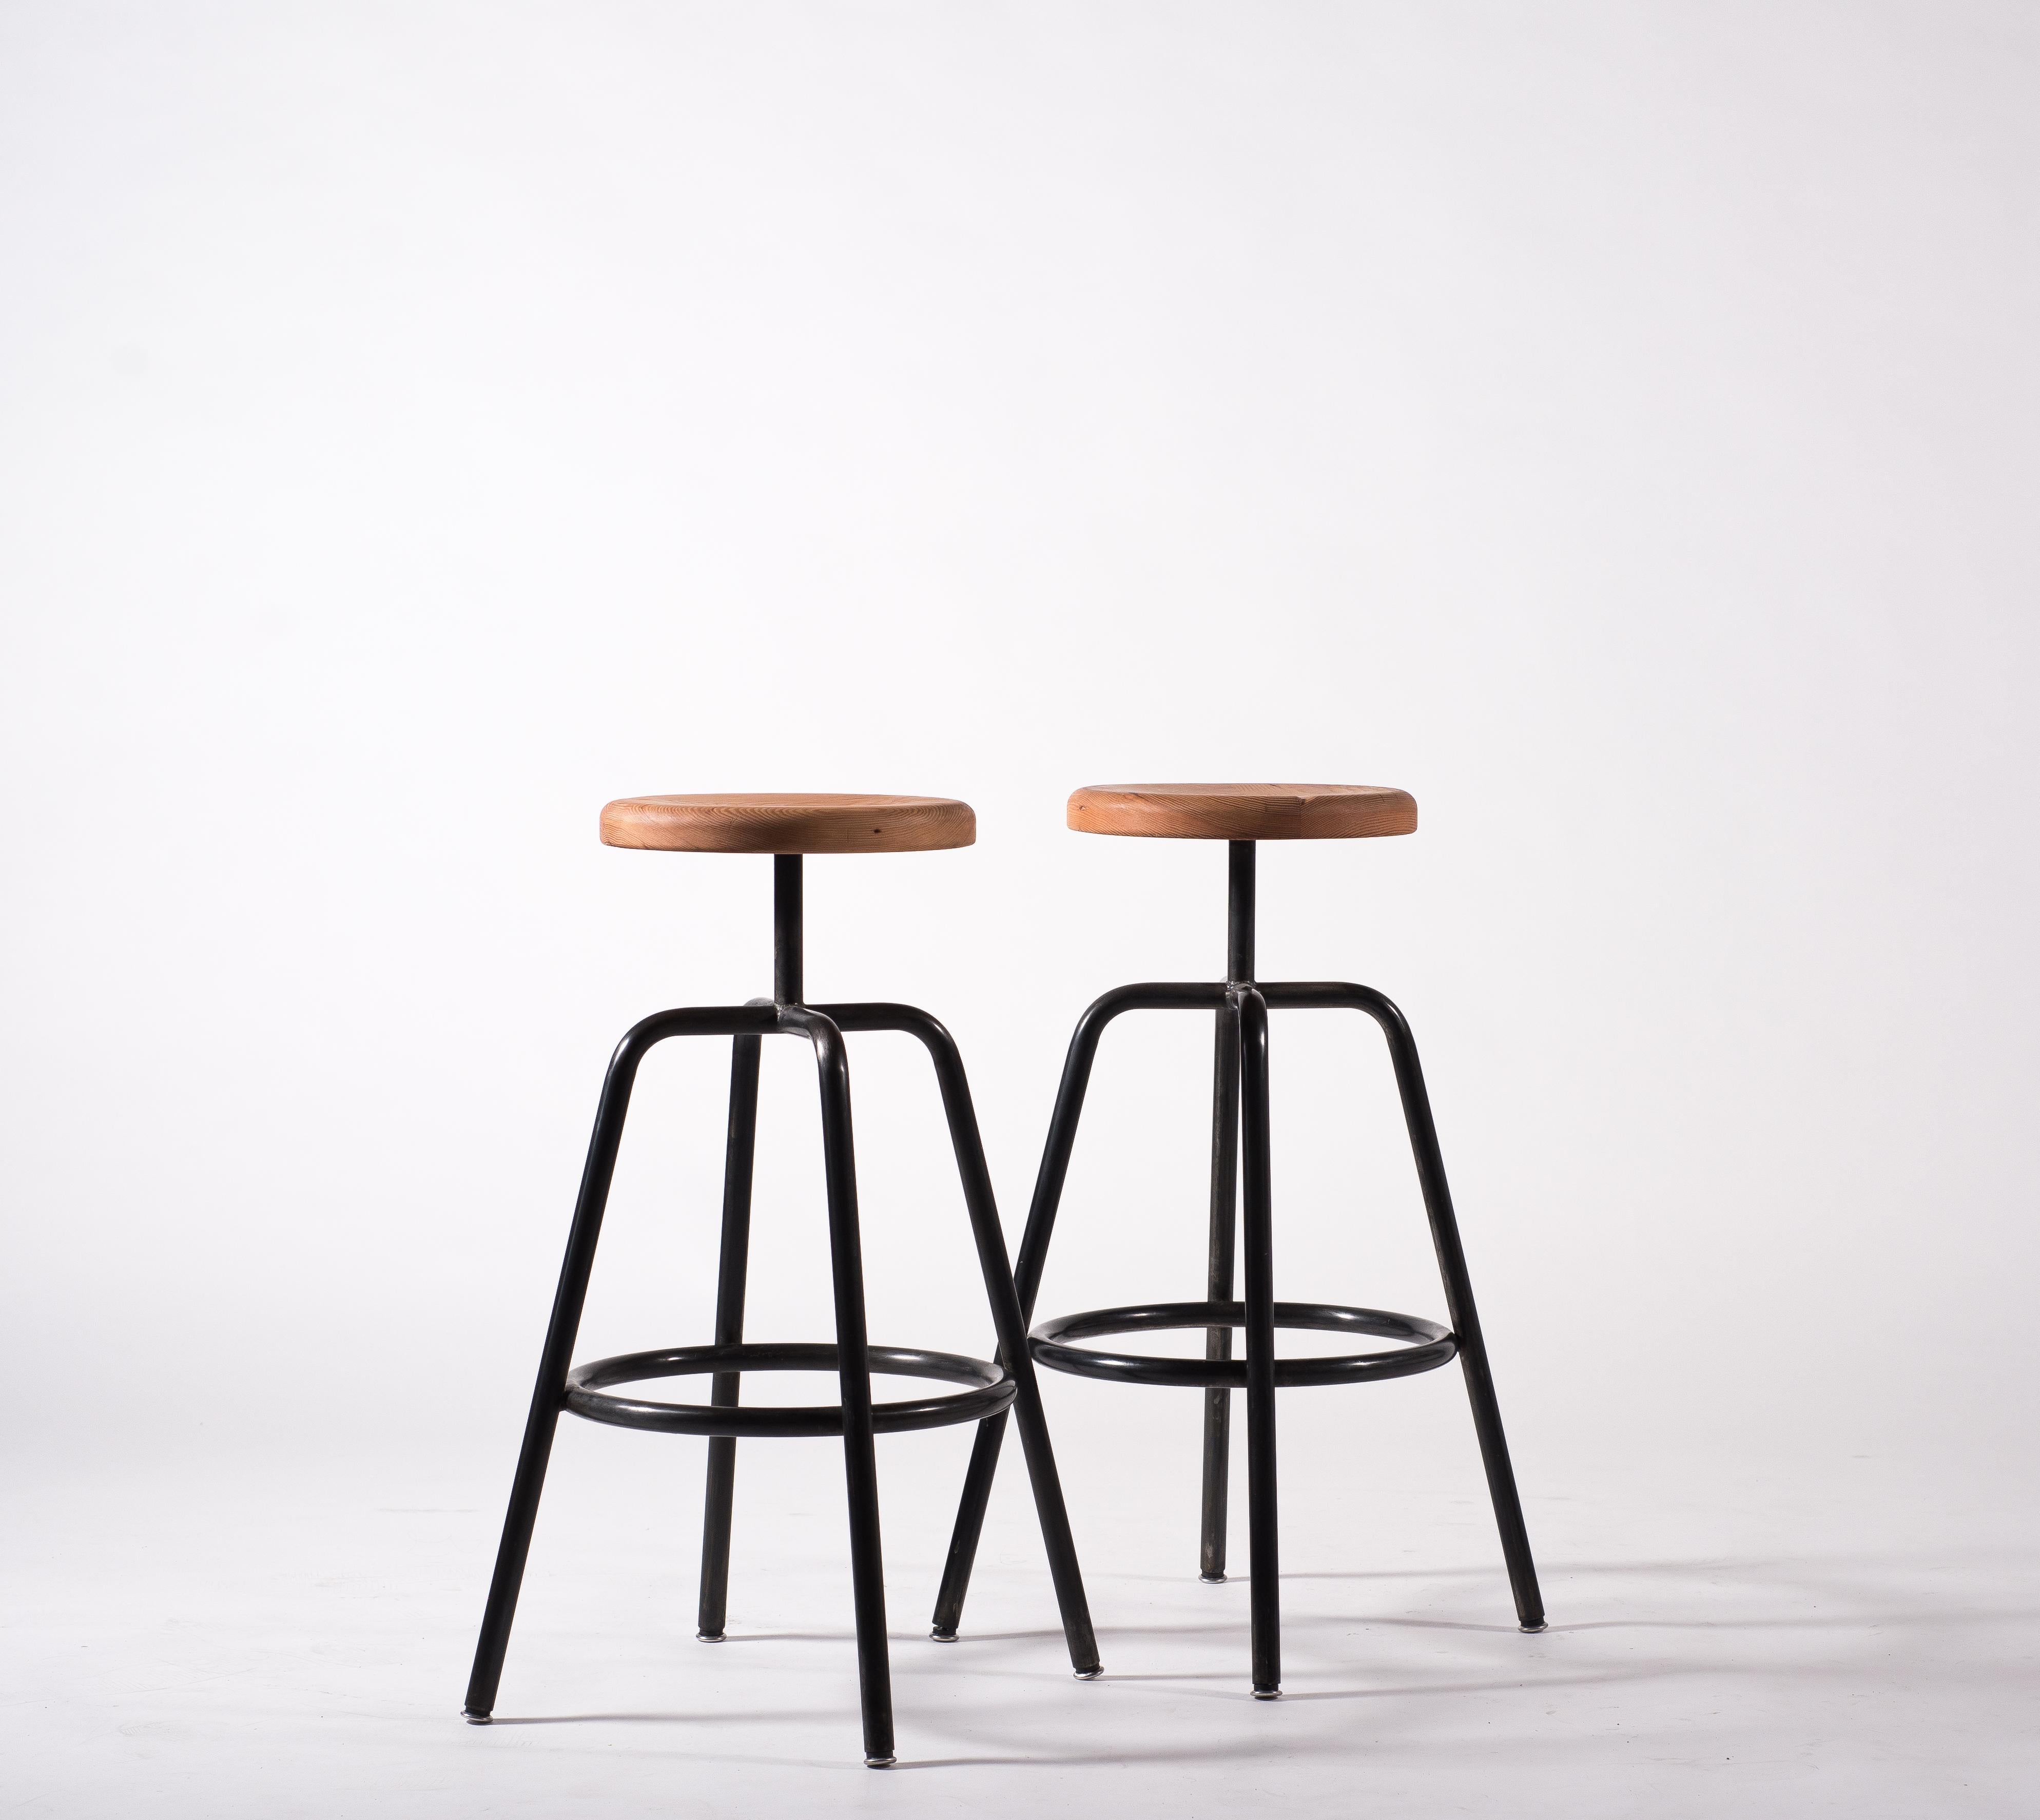 Simple and strong. A utility bar stool that incorporates vintage Douglas fir wood and repurposes it for a seat. Softened by hand, the seat shines in all its aged imperfections, counterbalancing the clean and clear steel pipe leg construction.